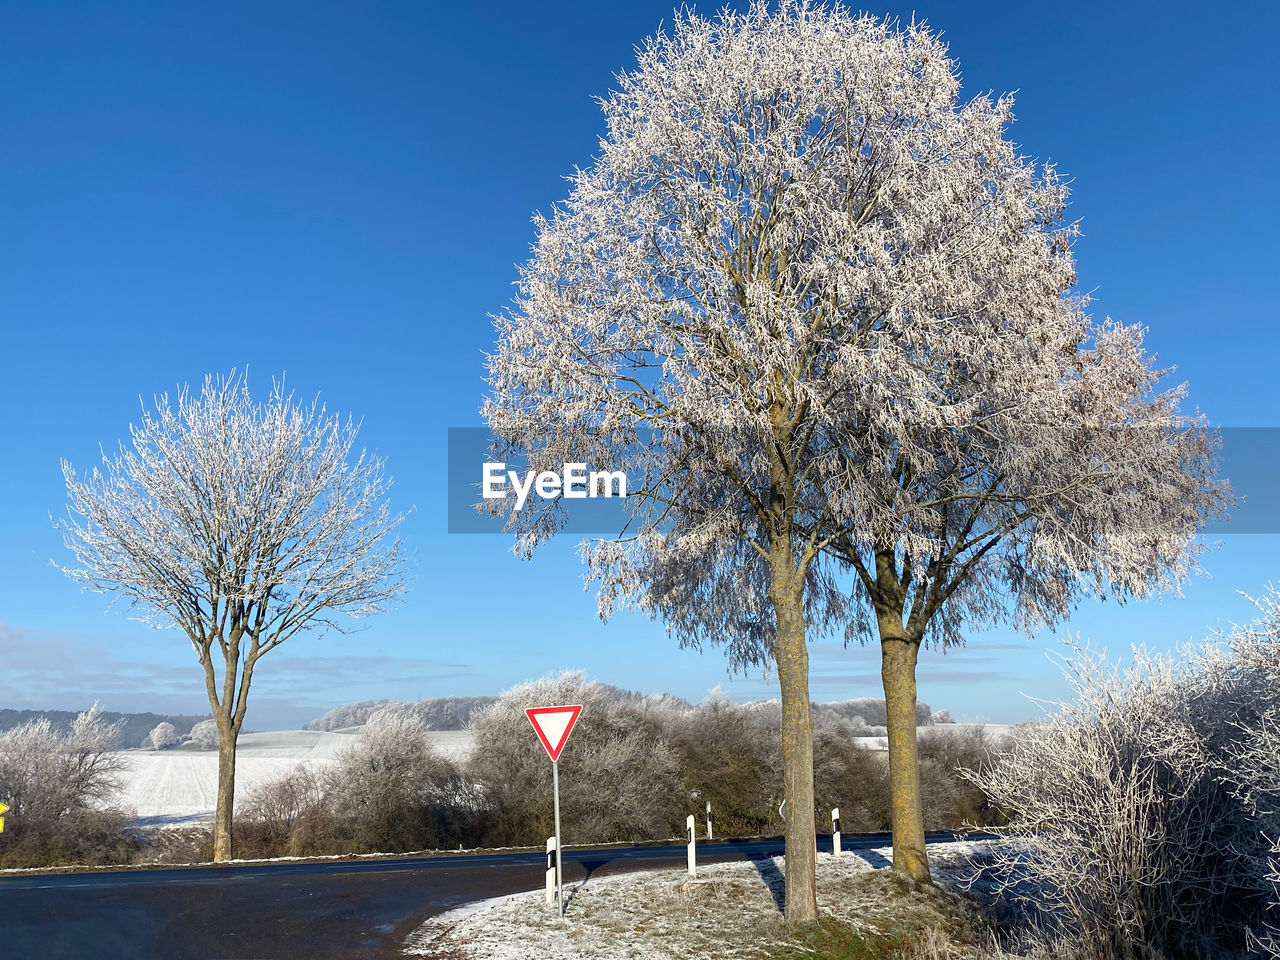 tree, plant, sky, nature, winter, blue, flower, clear sky, beauty in nature, day, snow, bare tree, no people, frost, road, cold temperature, sunny, outdoors, scenics - nature, tranquility, landscape, branch, environment, white, sunlight, tranquil scene, growth, sign